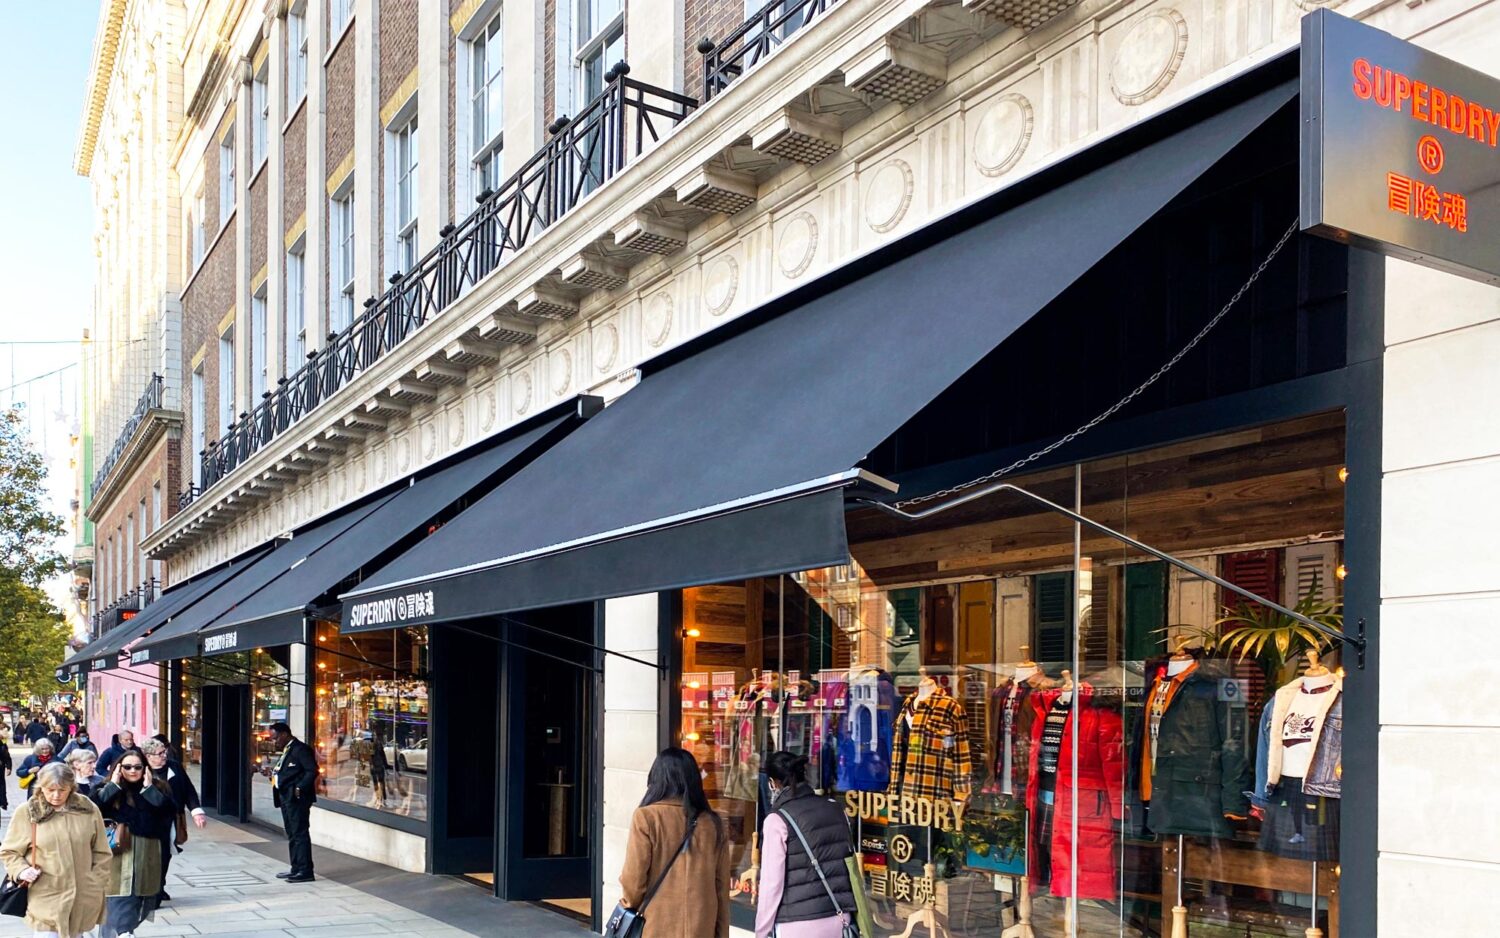 Shop Awnings in London for Superdry